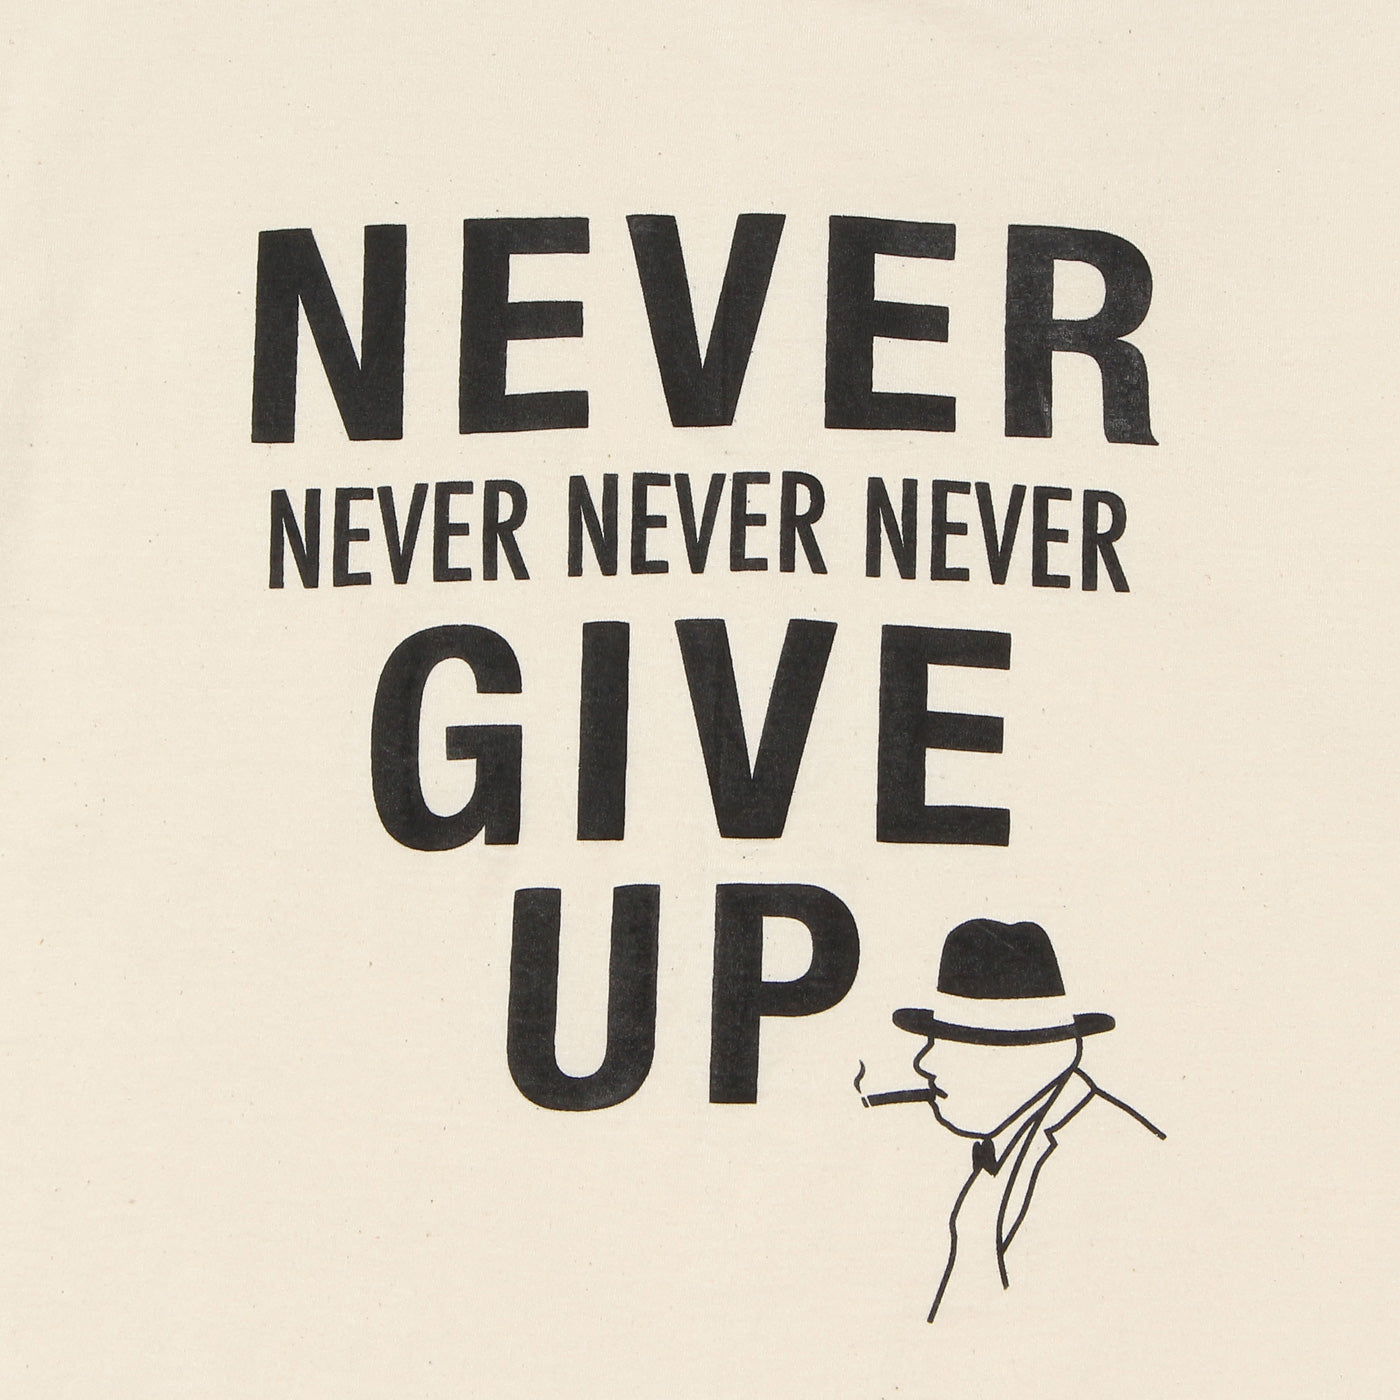 Disinfecting Cloth T Shirt Unisex 100% Cotton -Never Give Up- Made in Japan FORTUNA Tokyo